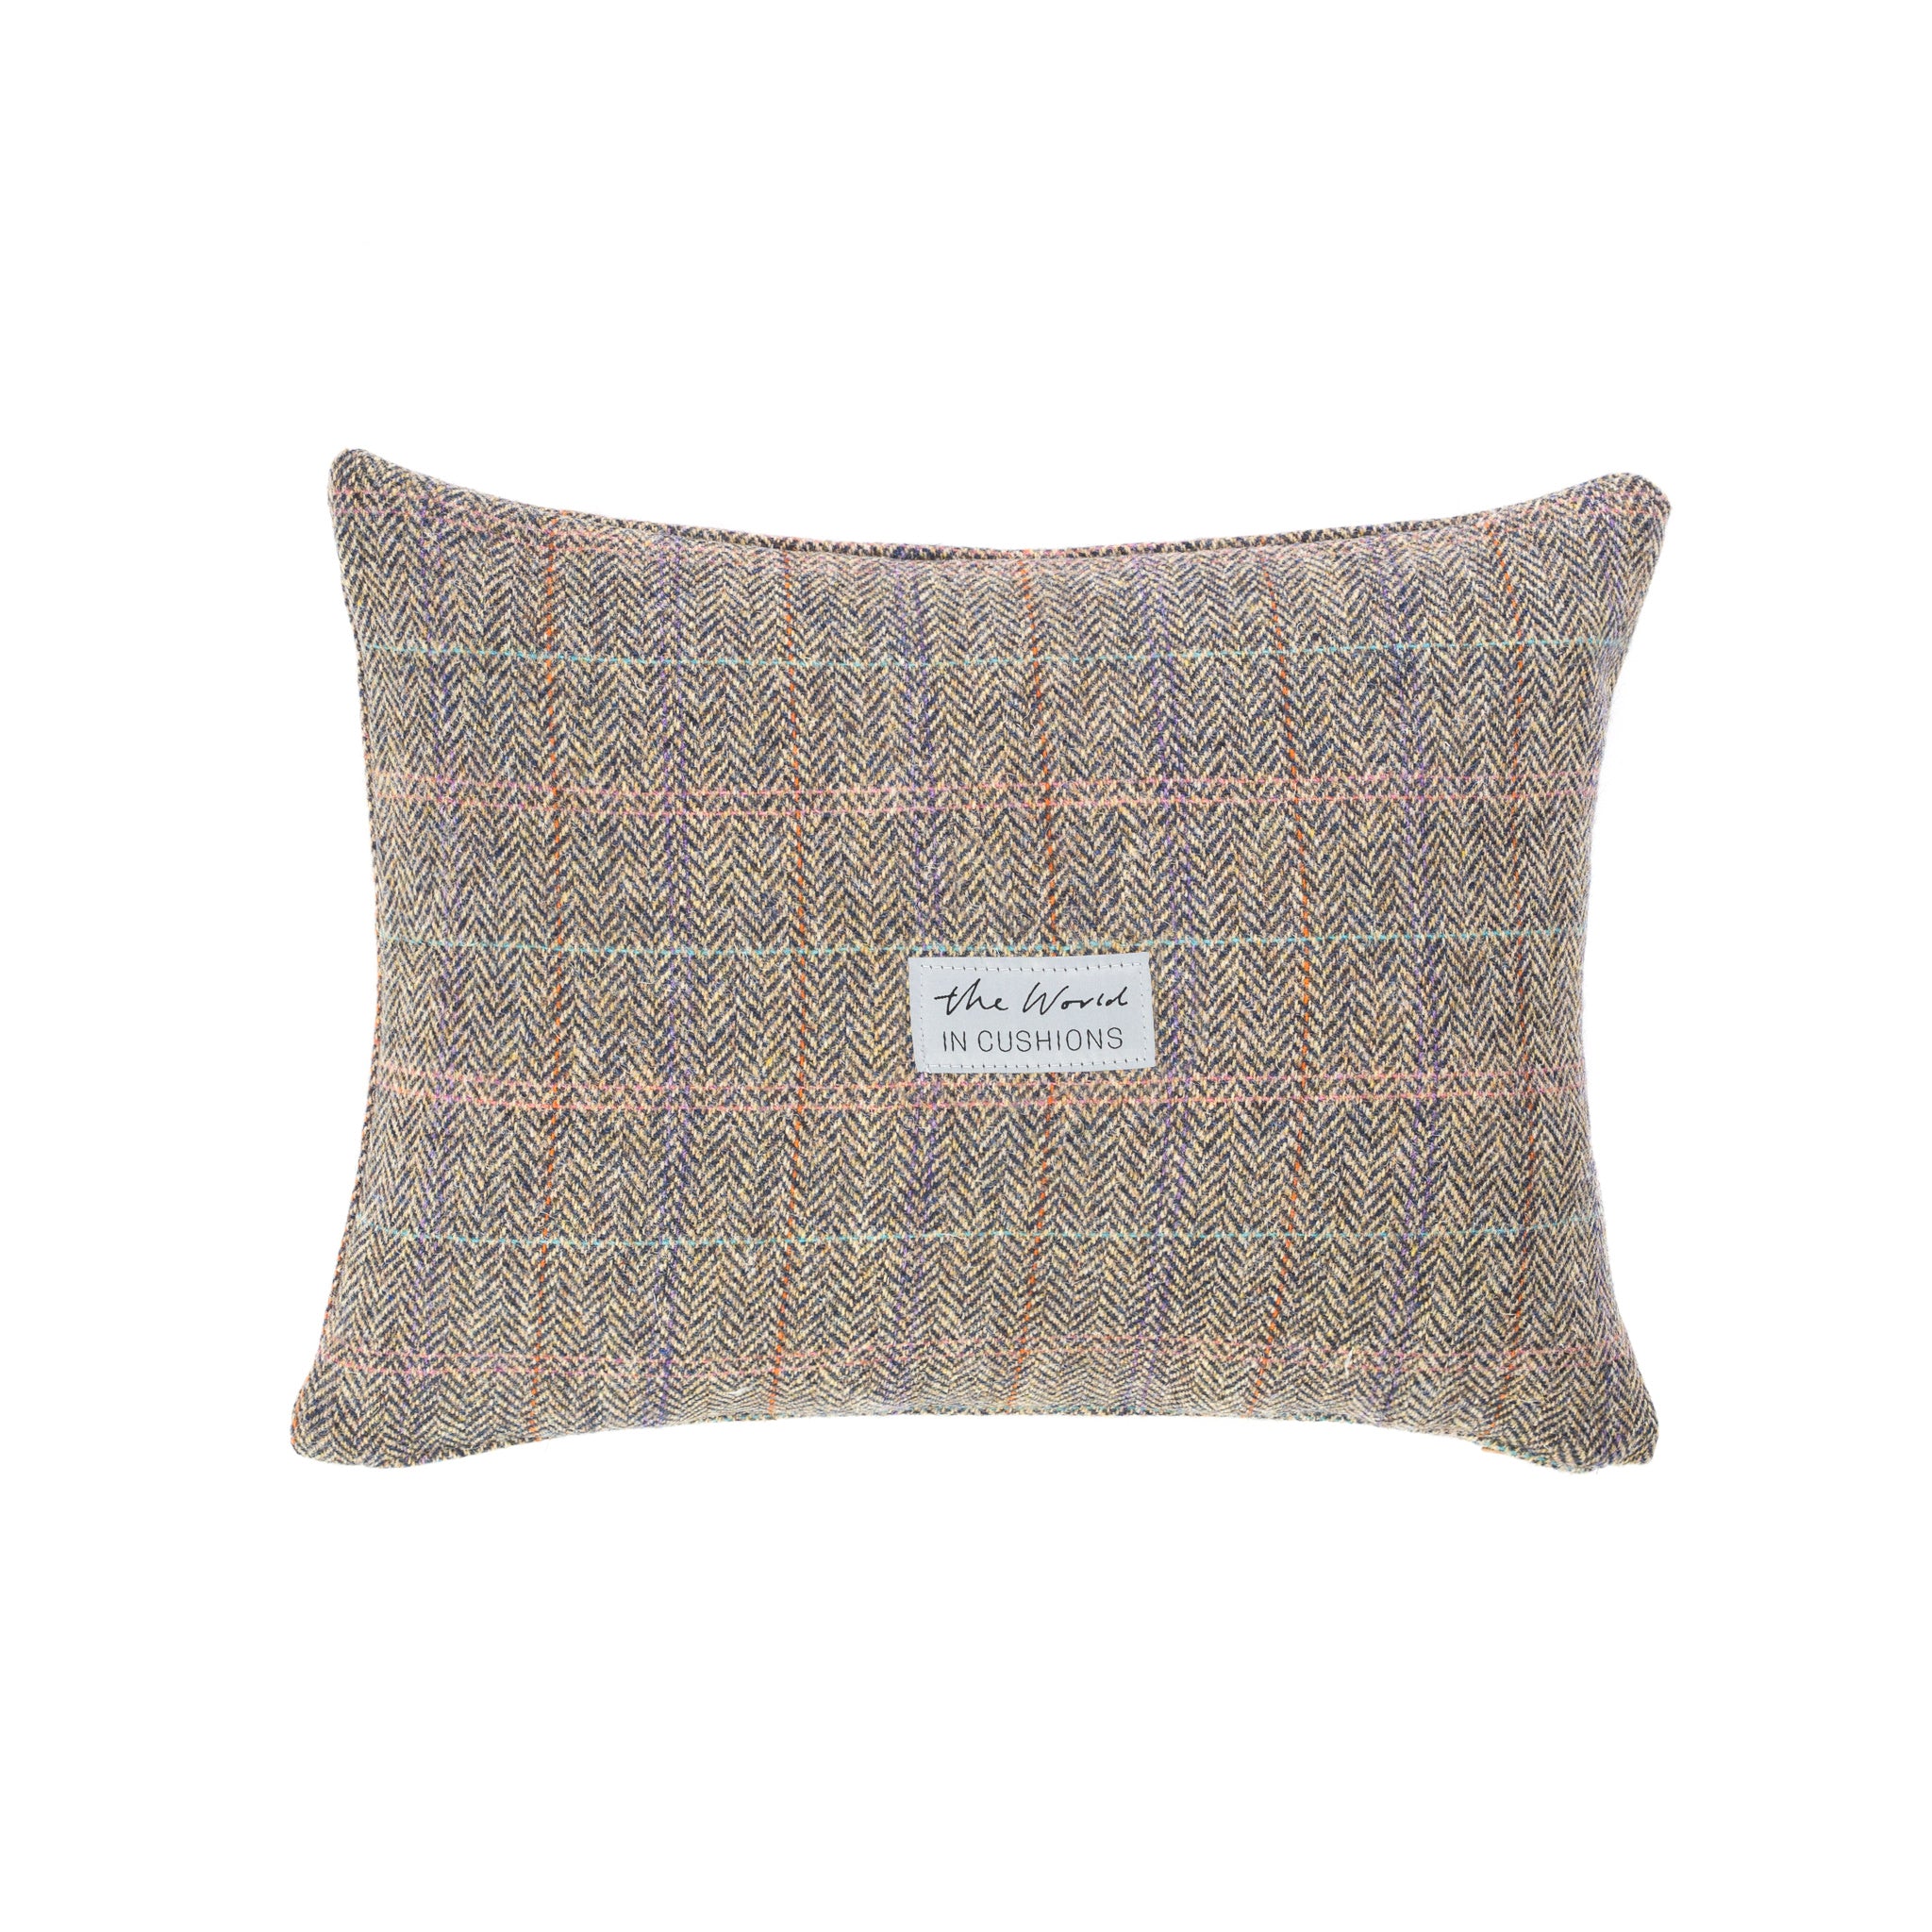 Harris Tweed/Pure Wool/Outer Hebrides/Scatter/Cushion/Beige/Purple/Pink/Pale Blue/Check/Back/